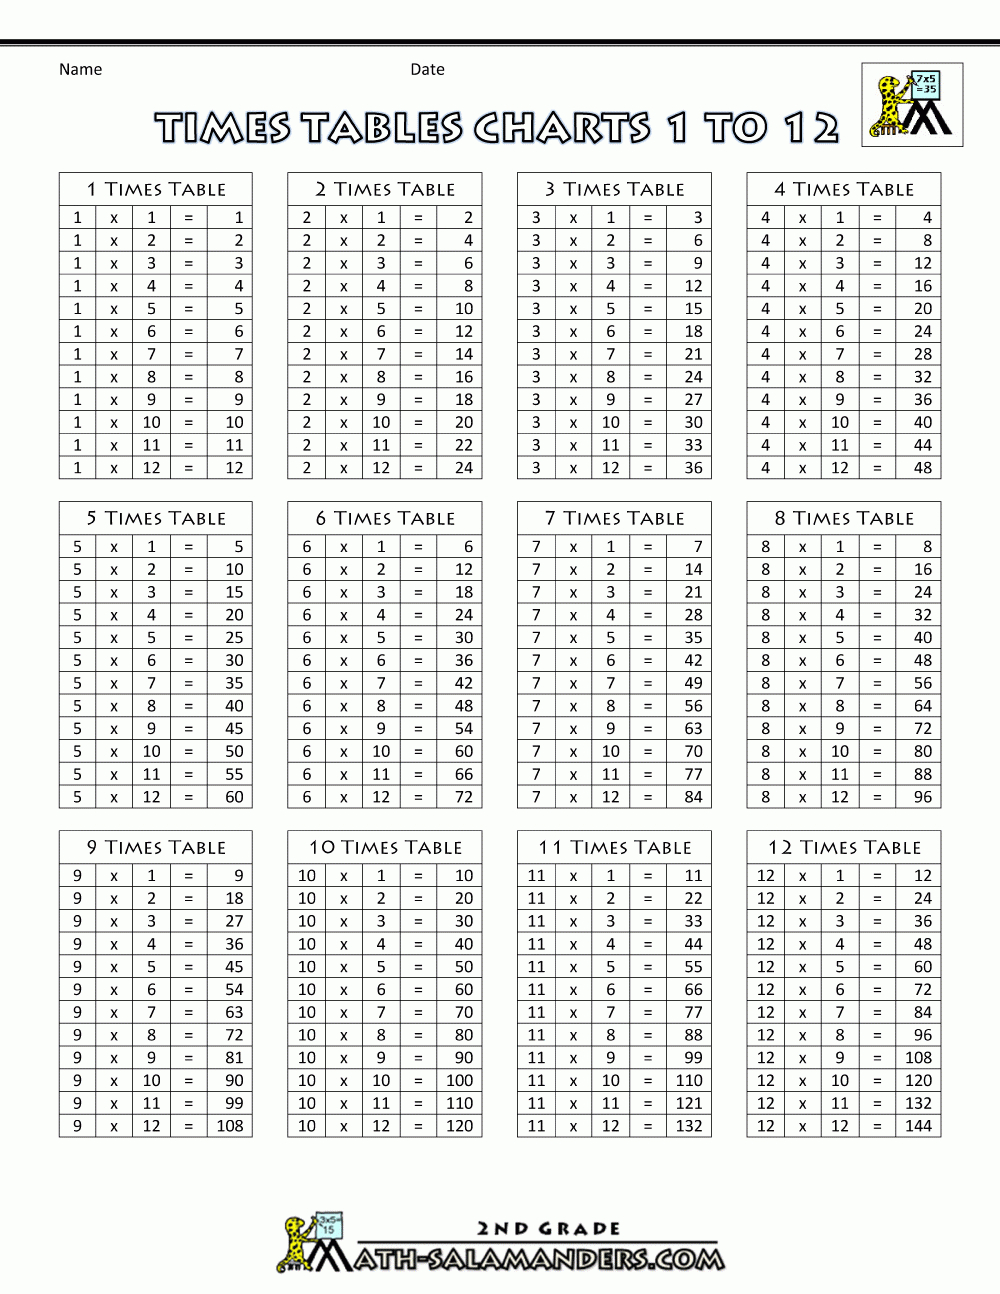 Times Tables Charts Up To 12 Times Table for Printable Multiplication Table 1-12